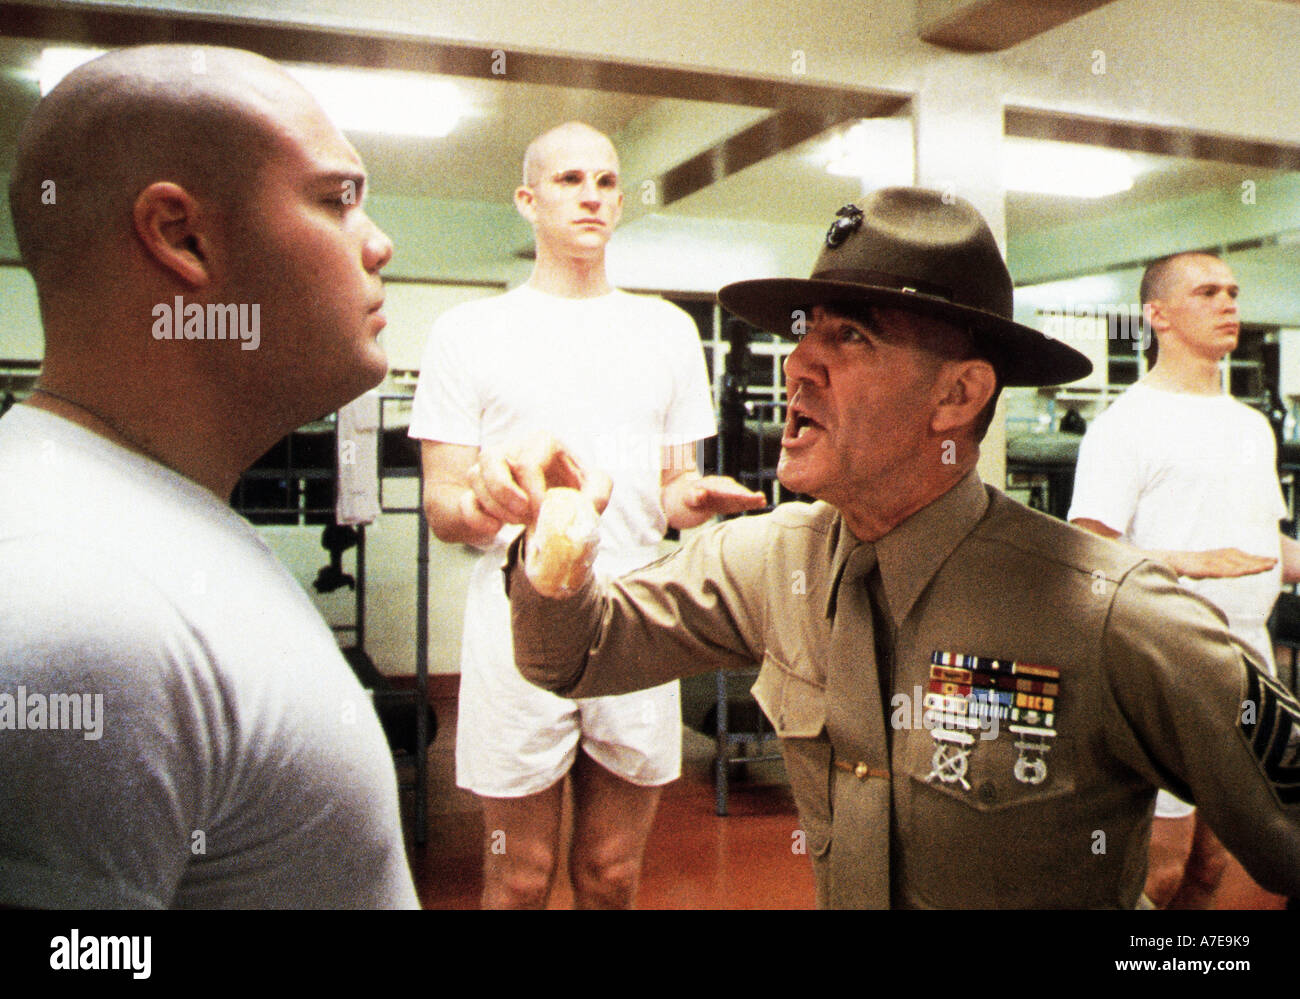 Full Metal Jacket Film High Resolution Stock Photography and Images - Alamy